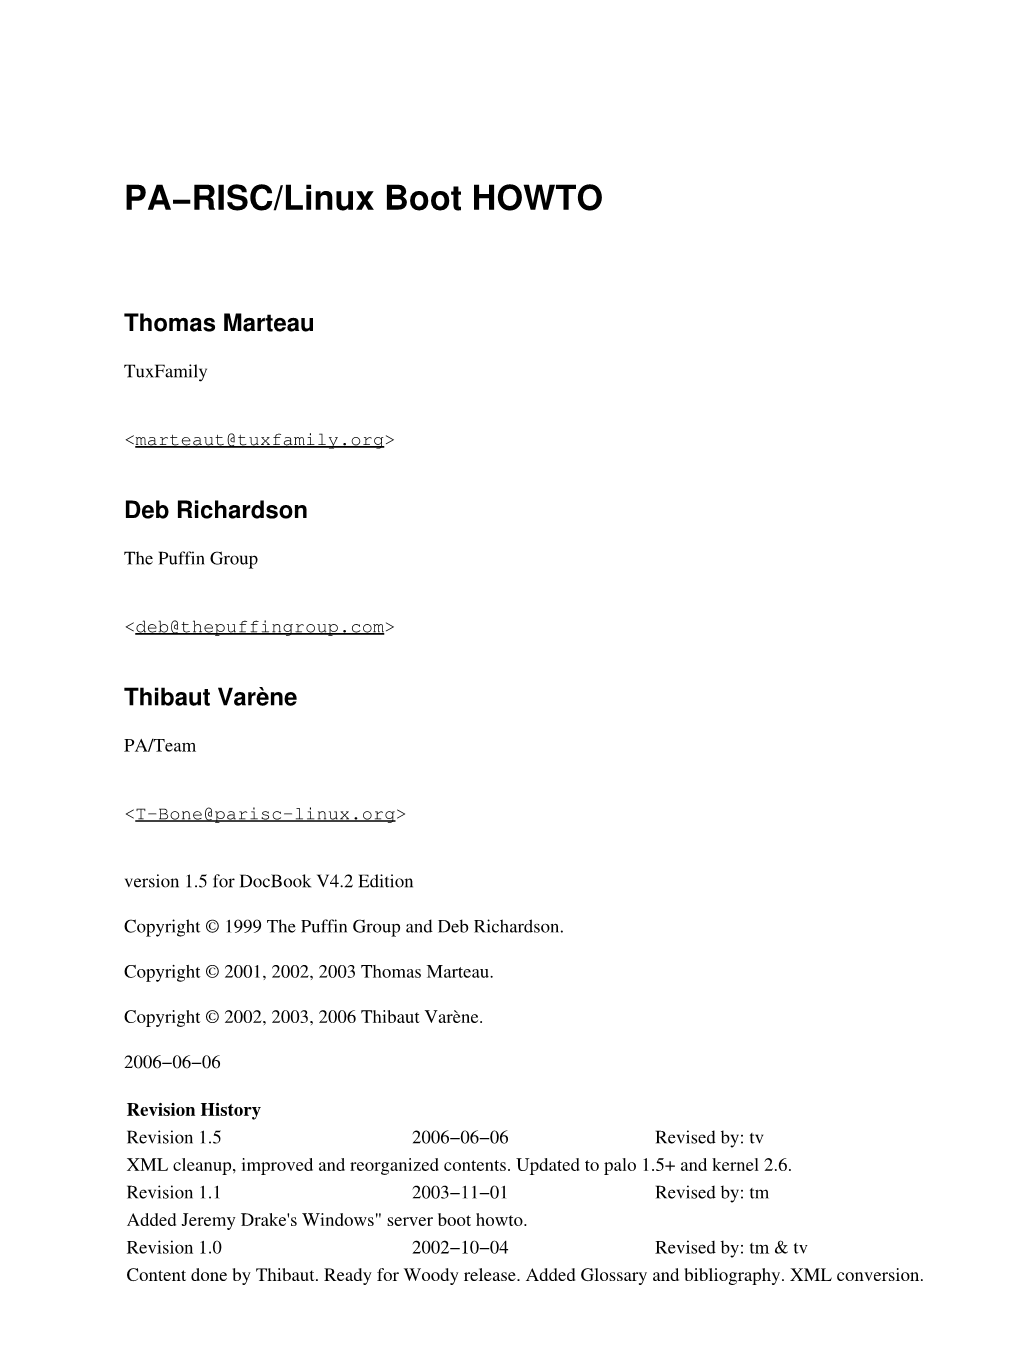 PA-RISC/Linux Boot HOWTO